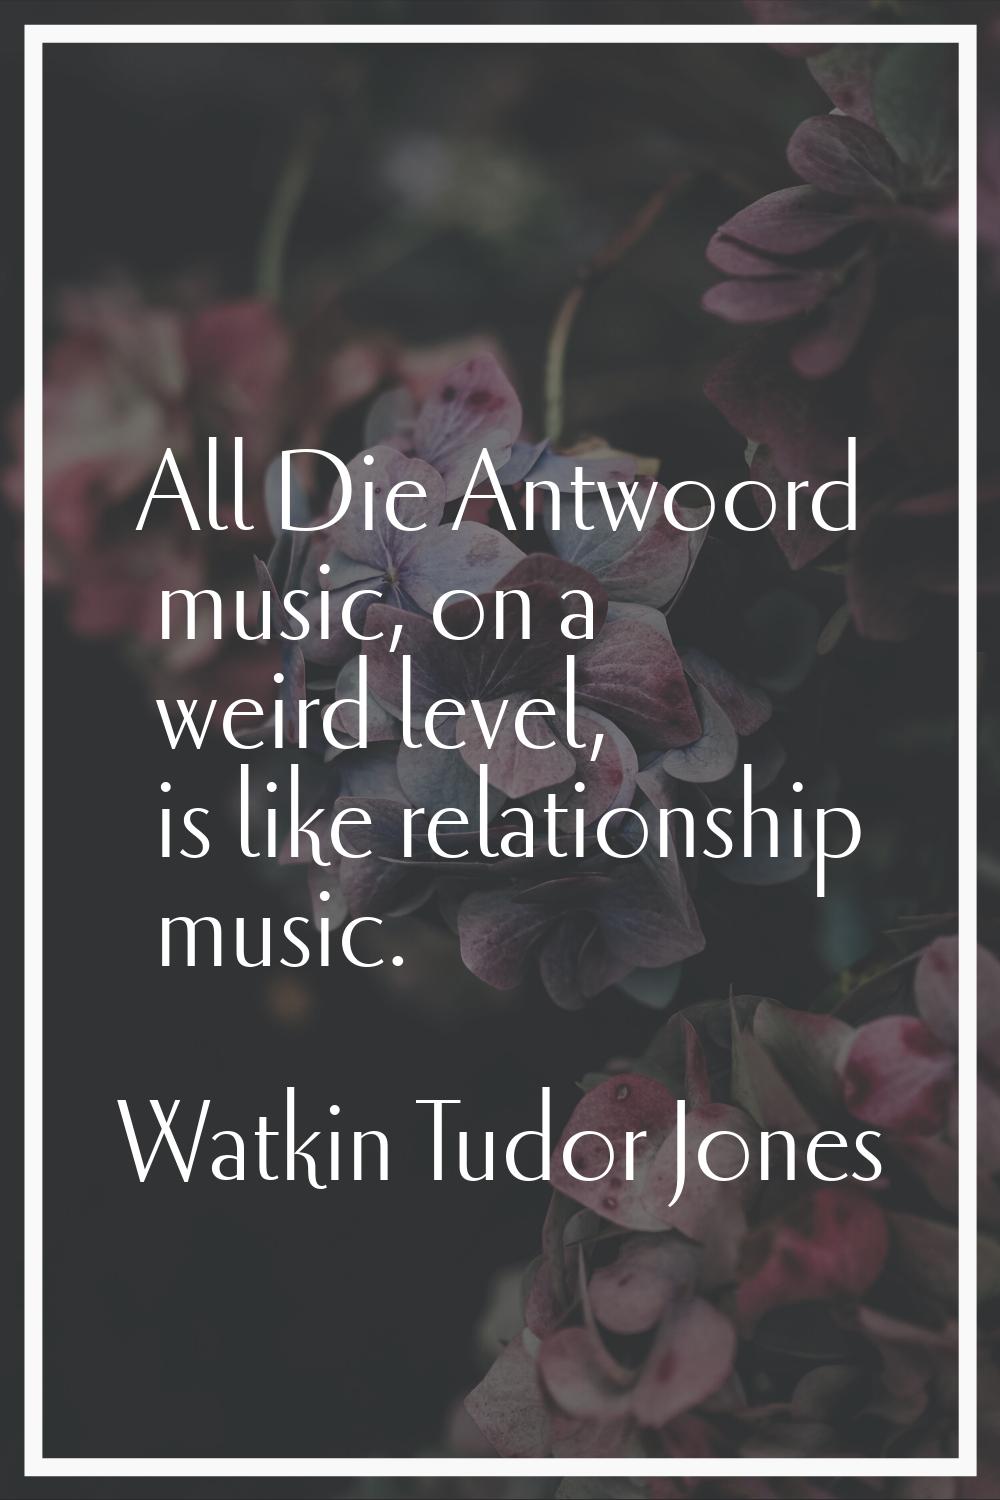 All Die Antwoord music, on a weird level, is like relationship music.